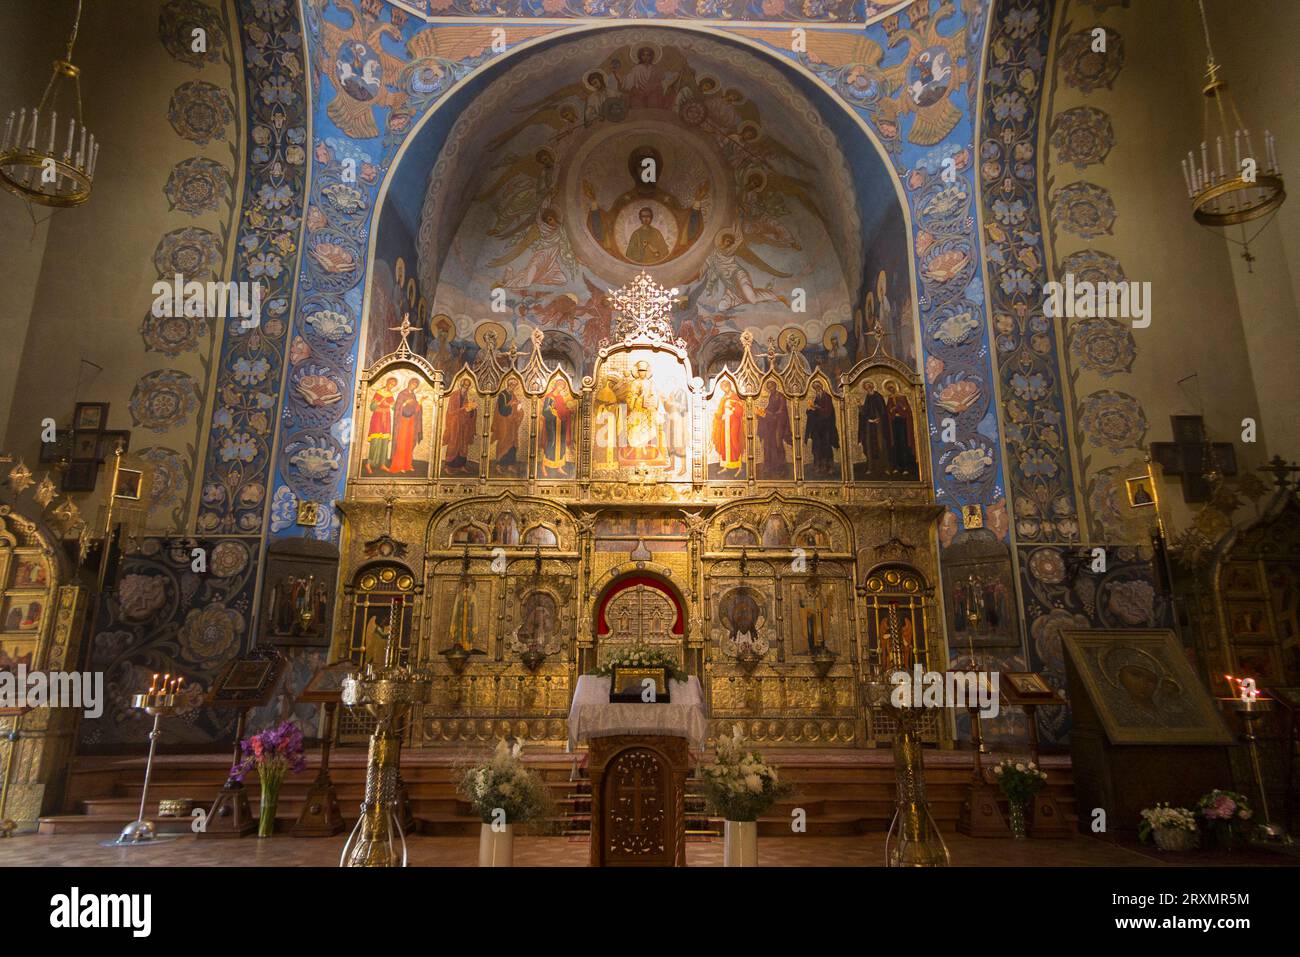 Looking up at images and paintings on the vaults of the altar apse at St Nicholas Orthodox Cathedral, Nice / Cathédrale Orthodoxe Saint-Nicolas de Nice. Russian Orthodox cathedral in France. The church altar is in the foreground. (135) Stock Photo